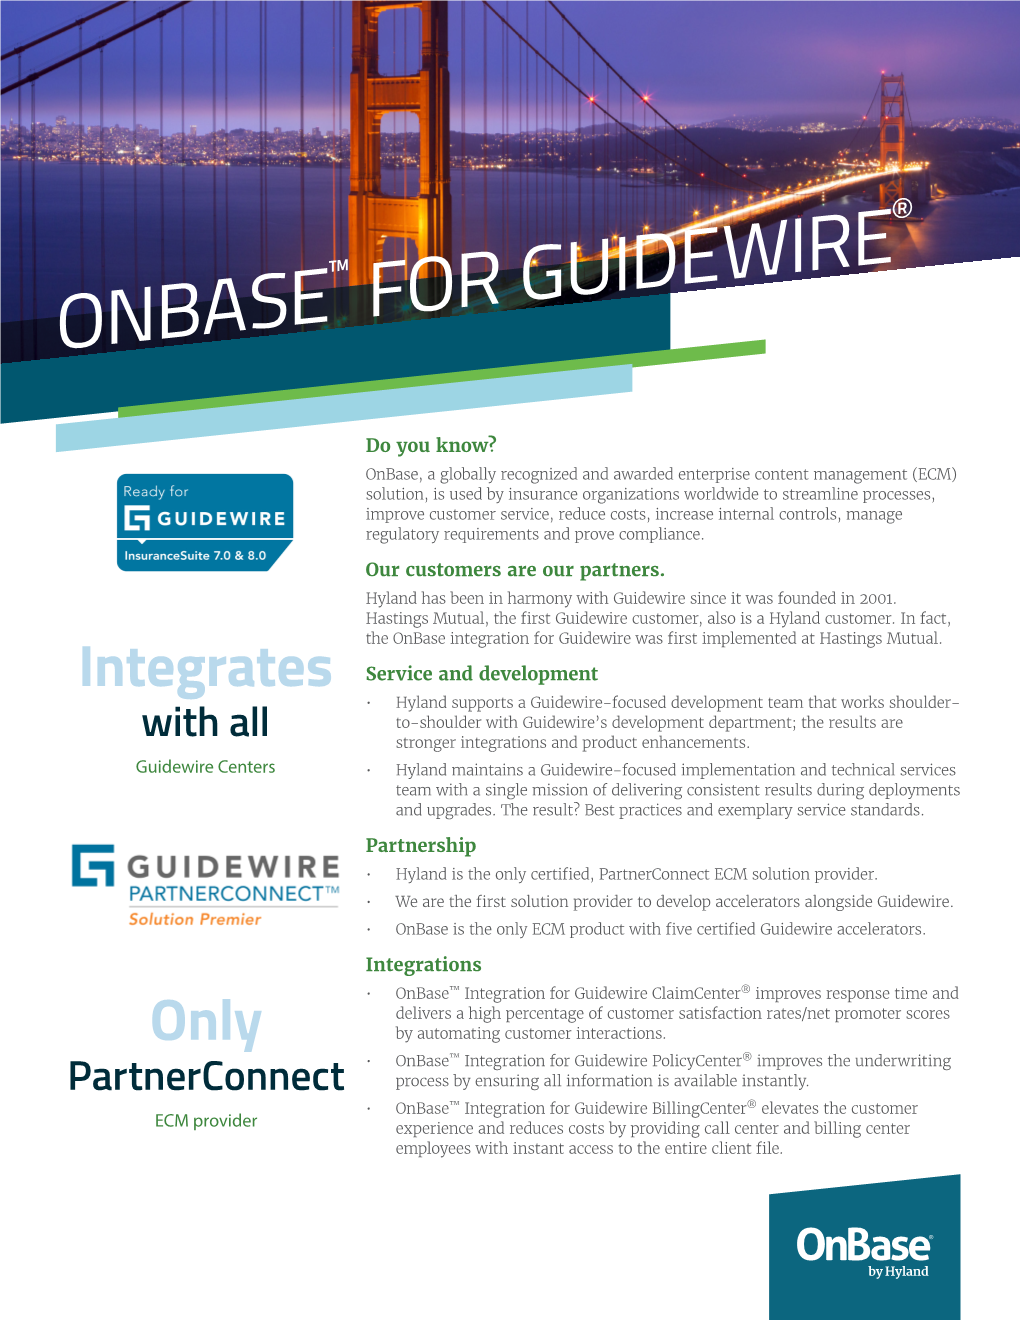 Fact Sheet: Onbase for Guidewire